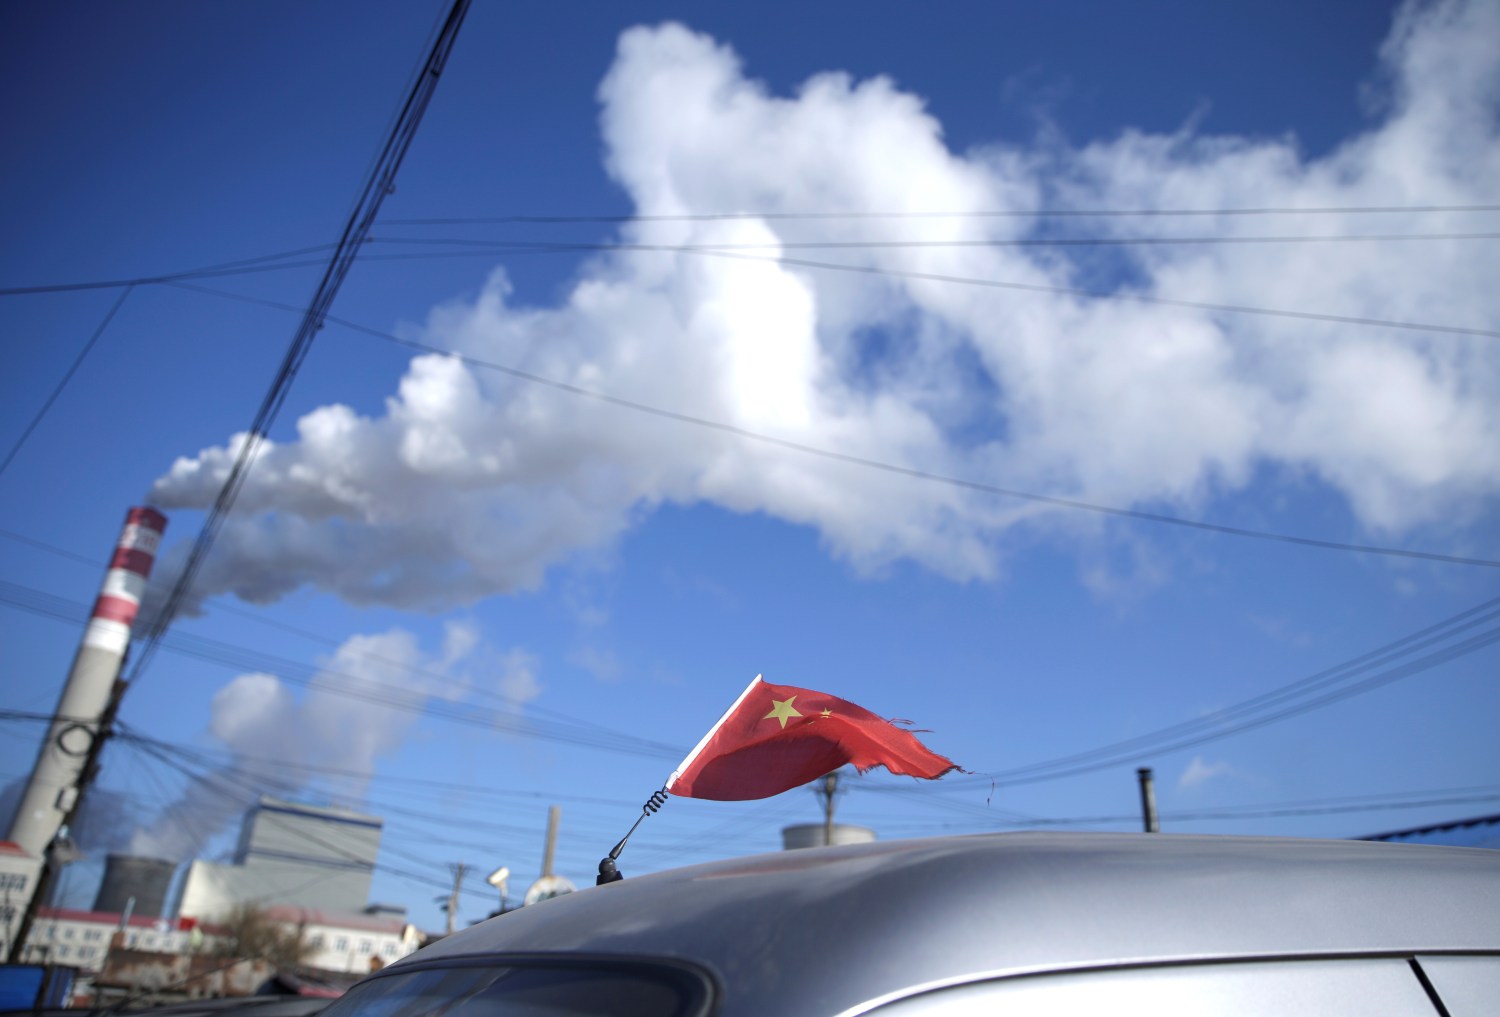 A Chinese flag is seen on the top of a car near a coal-fired power plant in Harbin, Heilongjiang province, China November 27, 2019. Picture taken November 27, 2019. REUTERS/Jason Lee u000d - RC2UKD9SW3H2